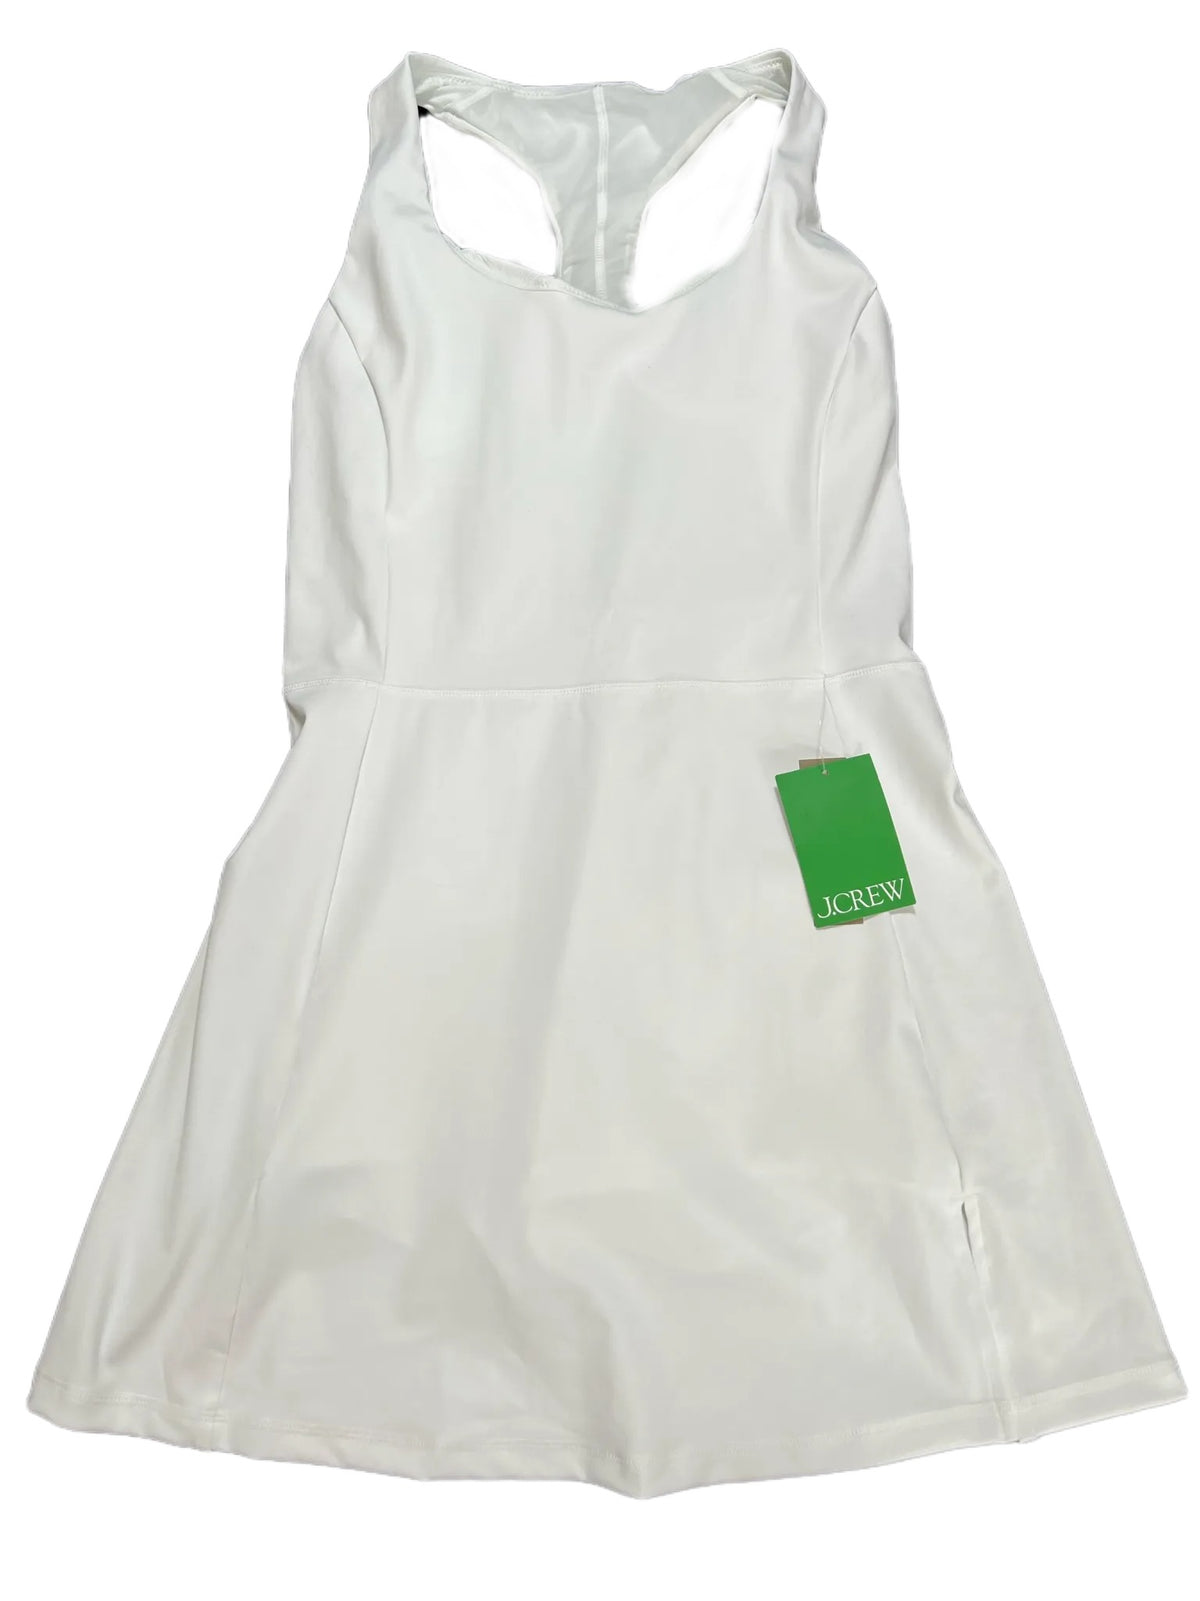 J Crew- White Exercise Dress NEW WITH TAGS